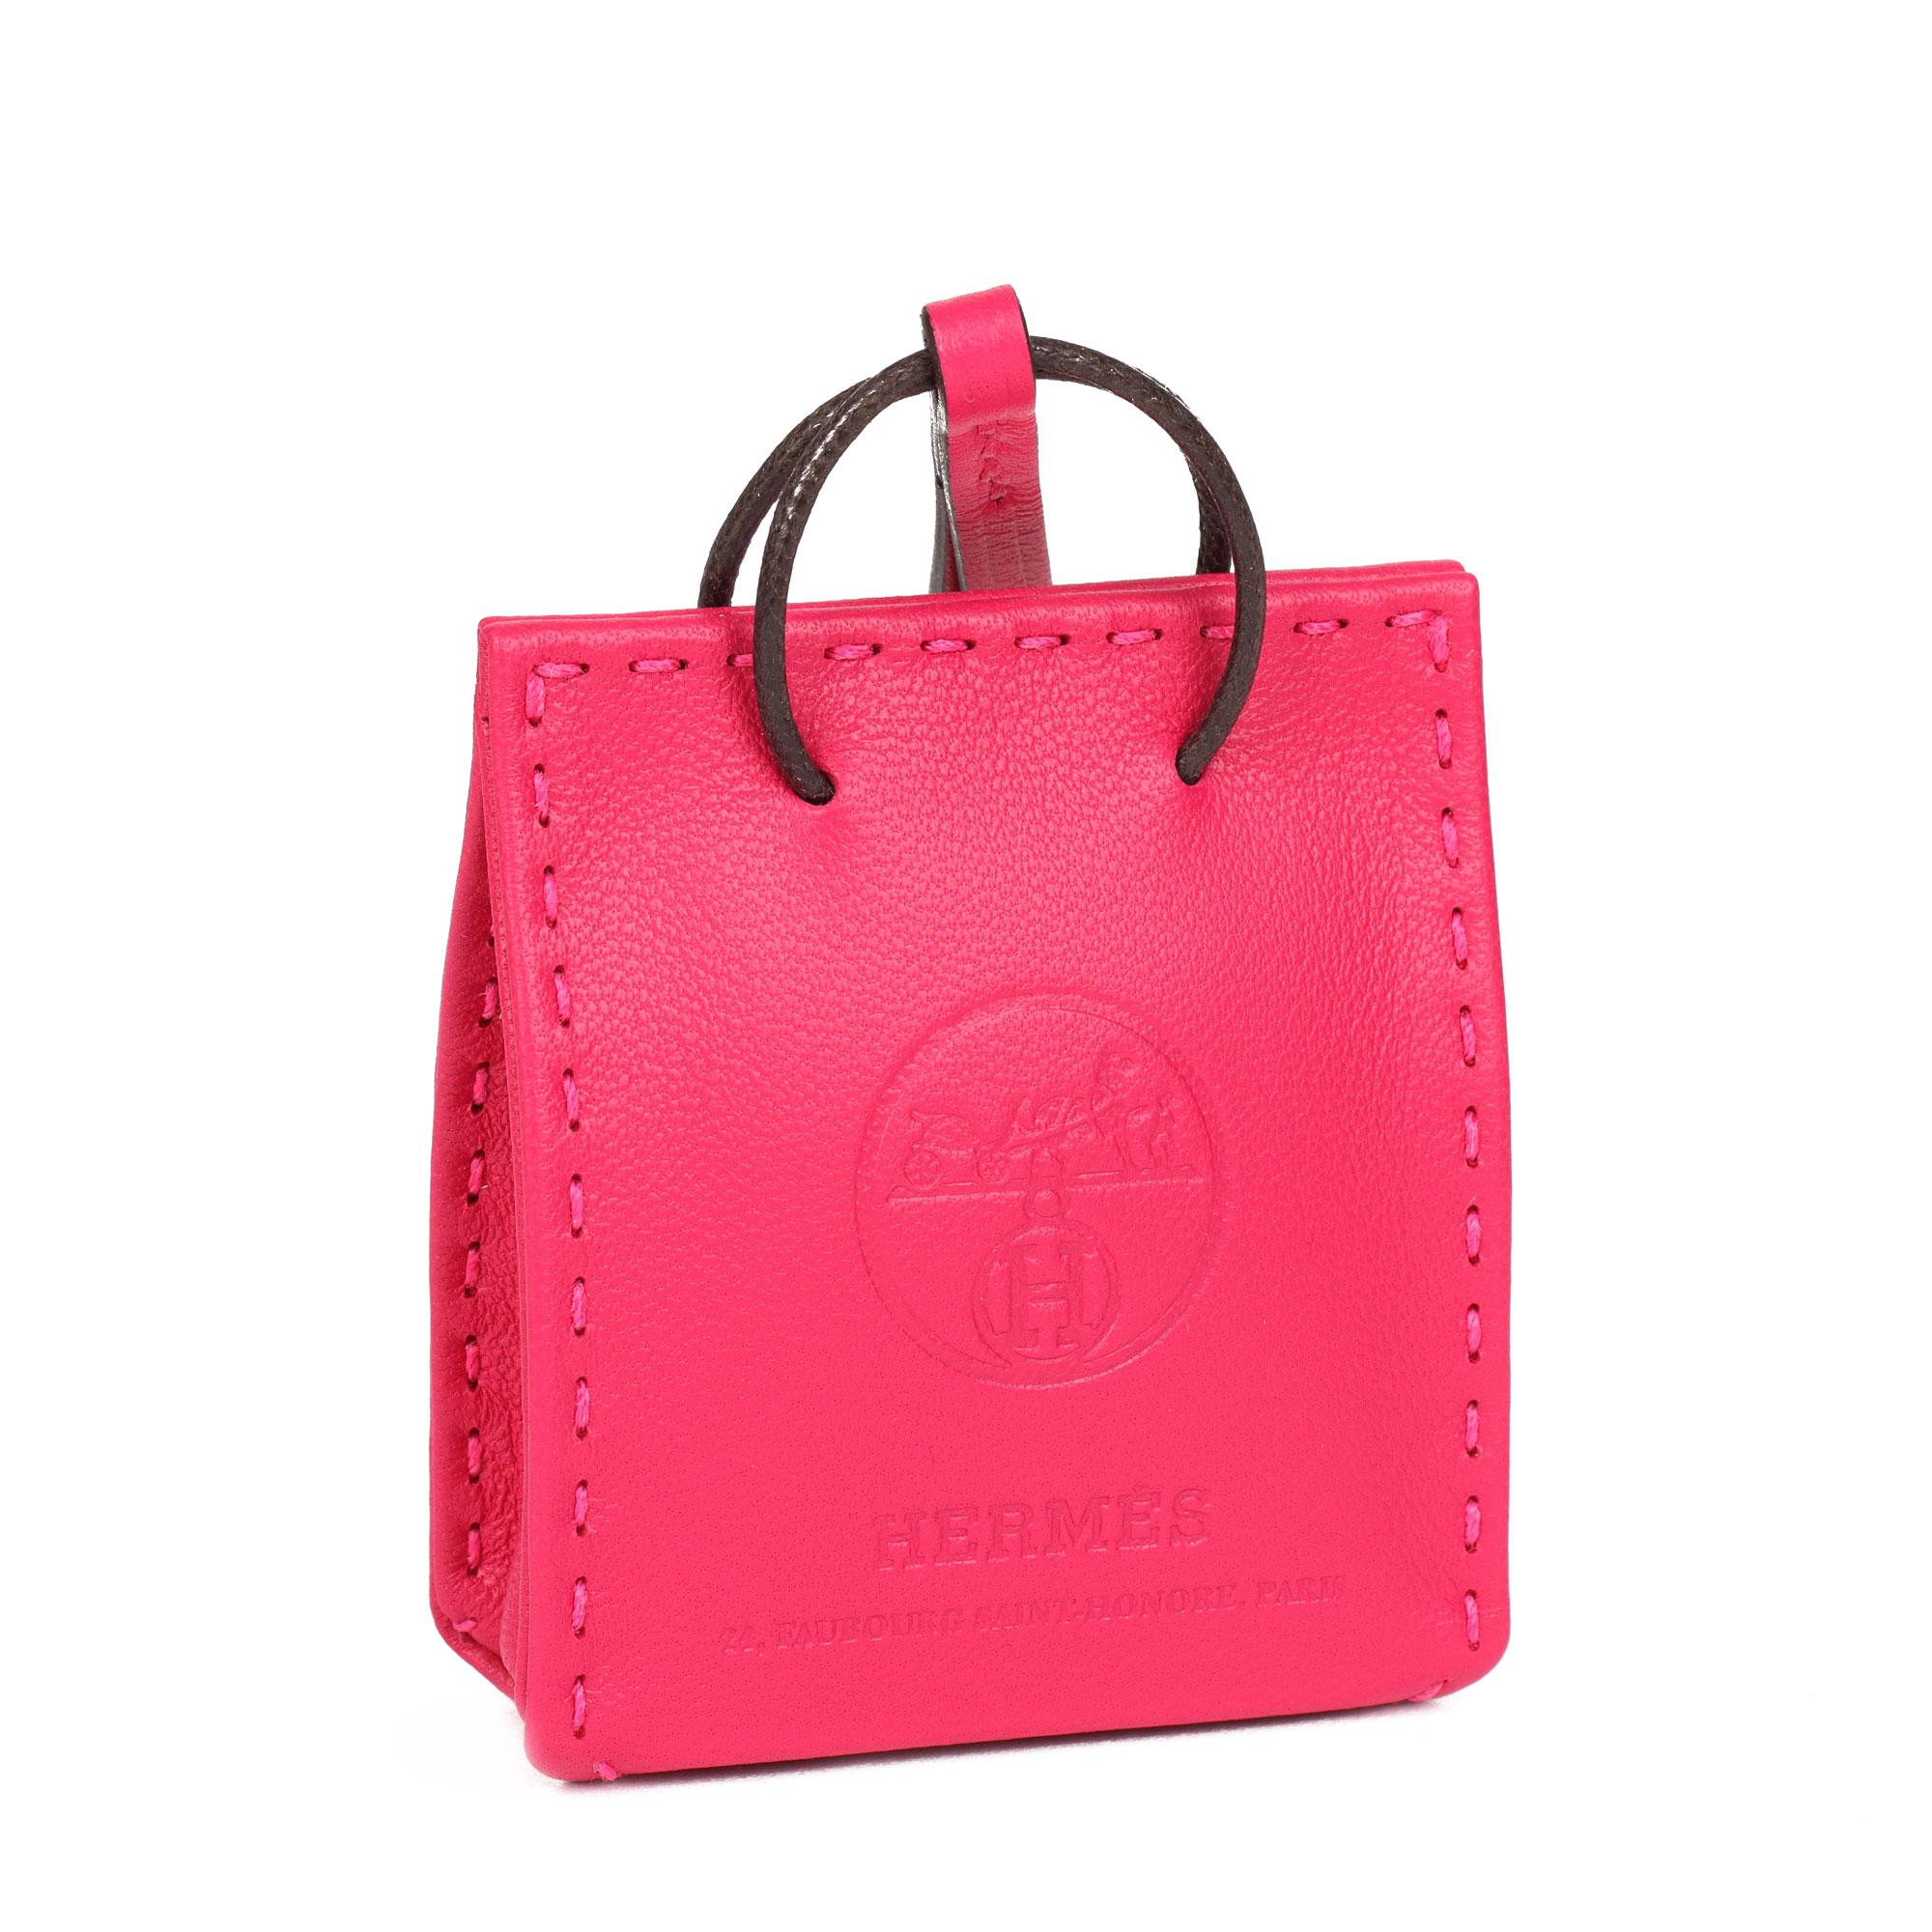 Hermès ROSE MEXICO LAMBSKIN LEATHER SHOPPING BAG CHARM

CONDITION NOTES
This item is in unworn condition.

BRAND	Hermès
MODEL	Shopping Bag Charm
AGE	2021
GENDER	Unisex
MATERIAL(S)	Lambskin Leather
COLOUR	Pink
BRAND COLOUR	Rose Mexico
ACCOMPANIED